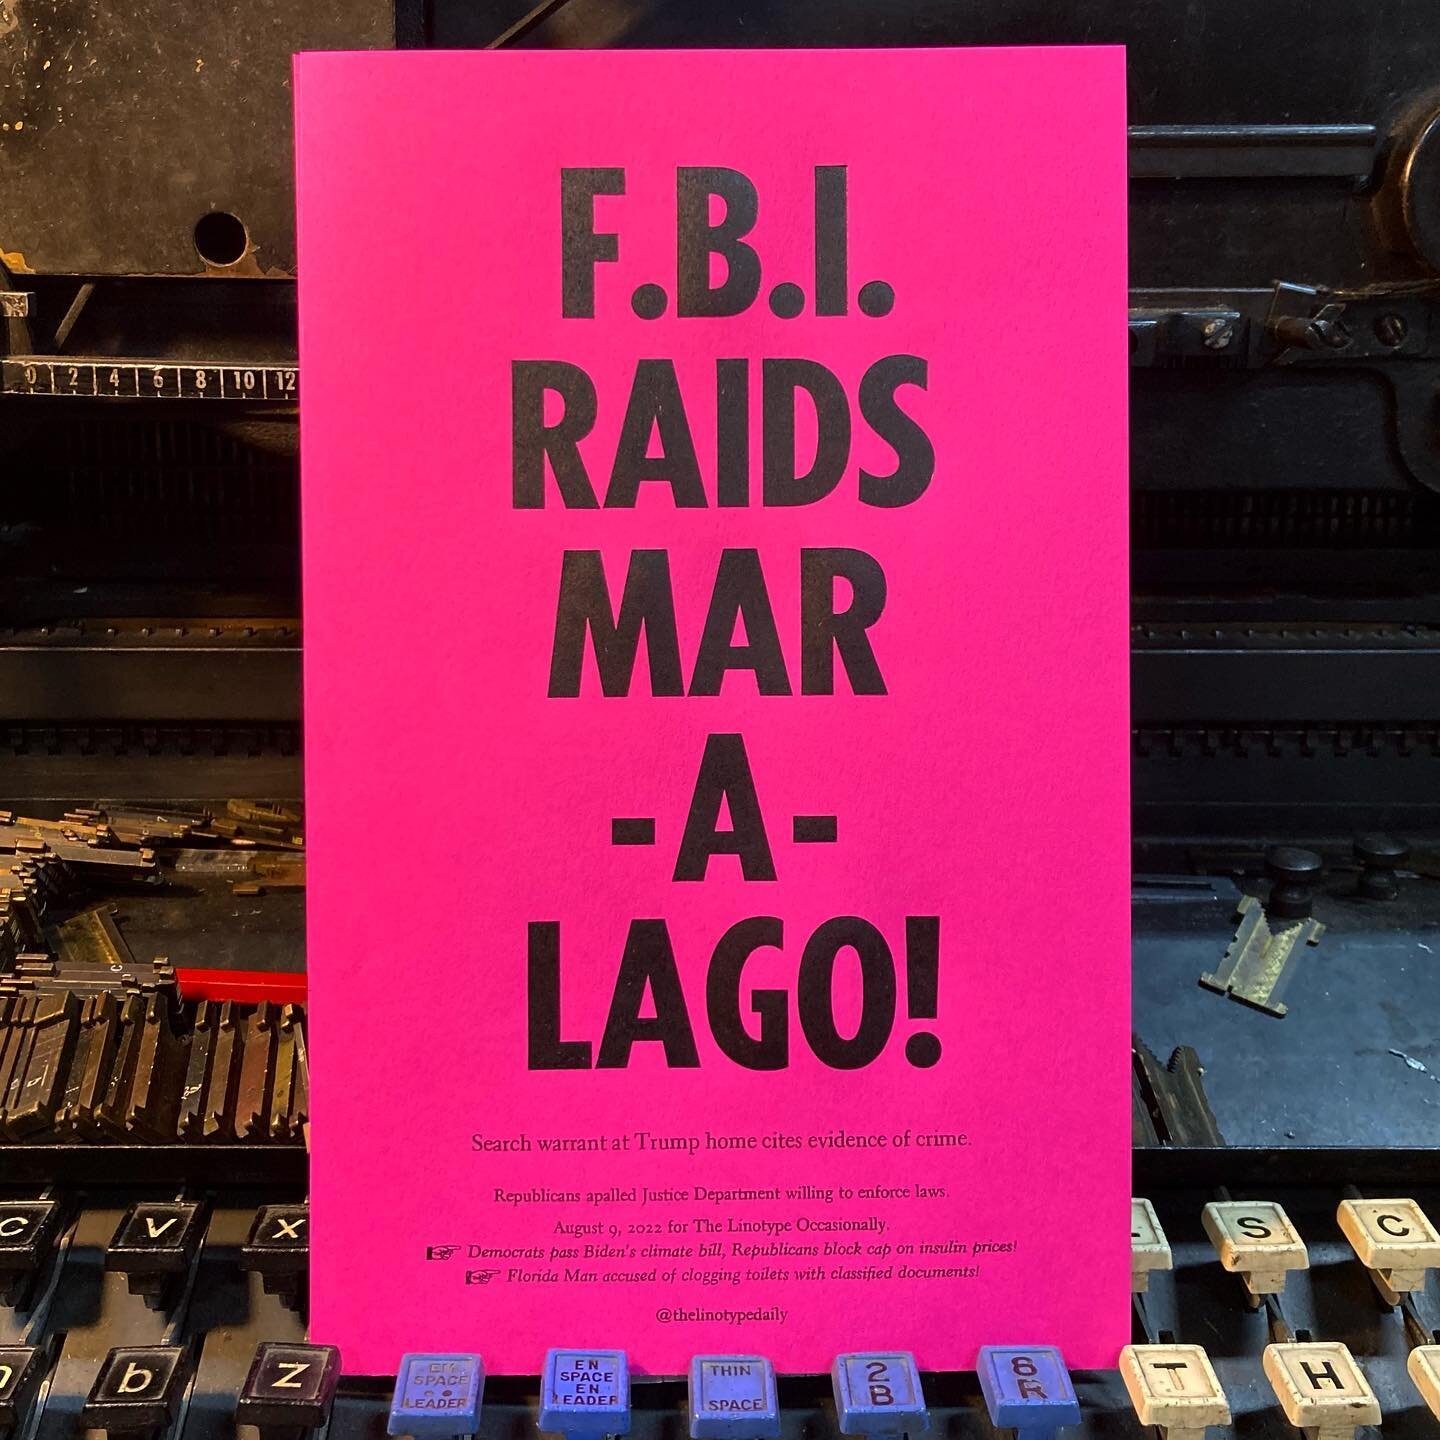 &ldquo;You gotta assume the stuff trump keeps in his safe is pretty wild and also likely crimey.&rdquo; &mdash; Molly Jong-Fast @mollyjongfast #letterpress #linotype #typecasting #maralago #fbiraid #crimedoesnotpay #floridaman #cloggedtoilet #insulin